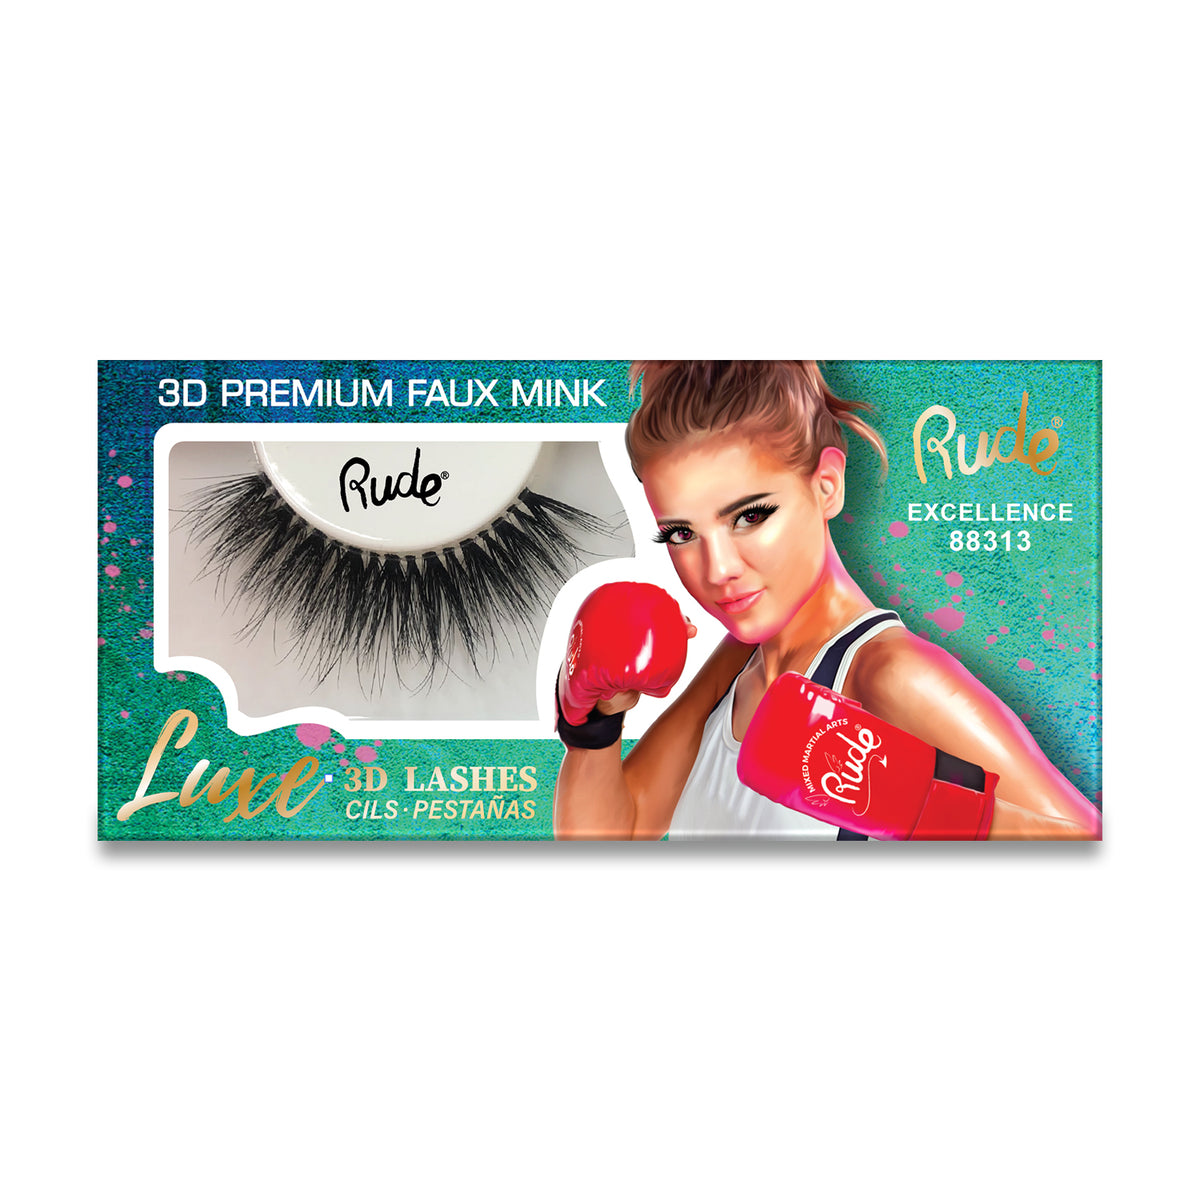 Luxe 3D Lashes | Premium 3D Eyelashes Excellence